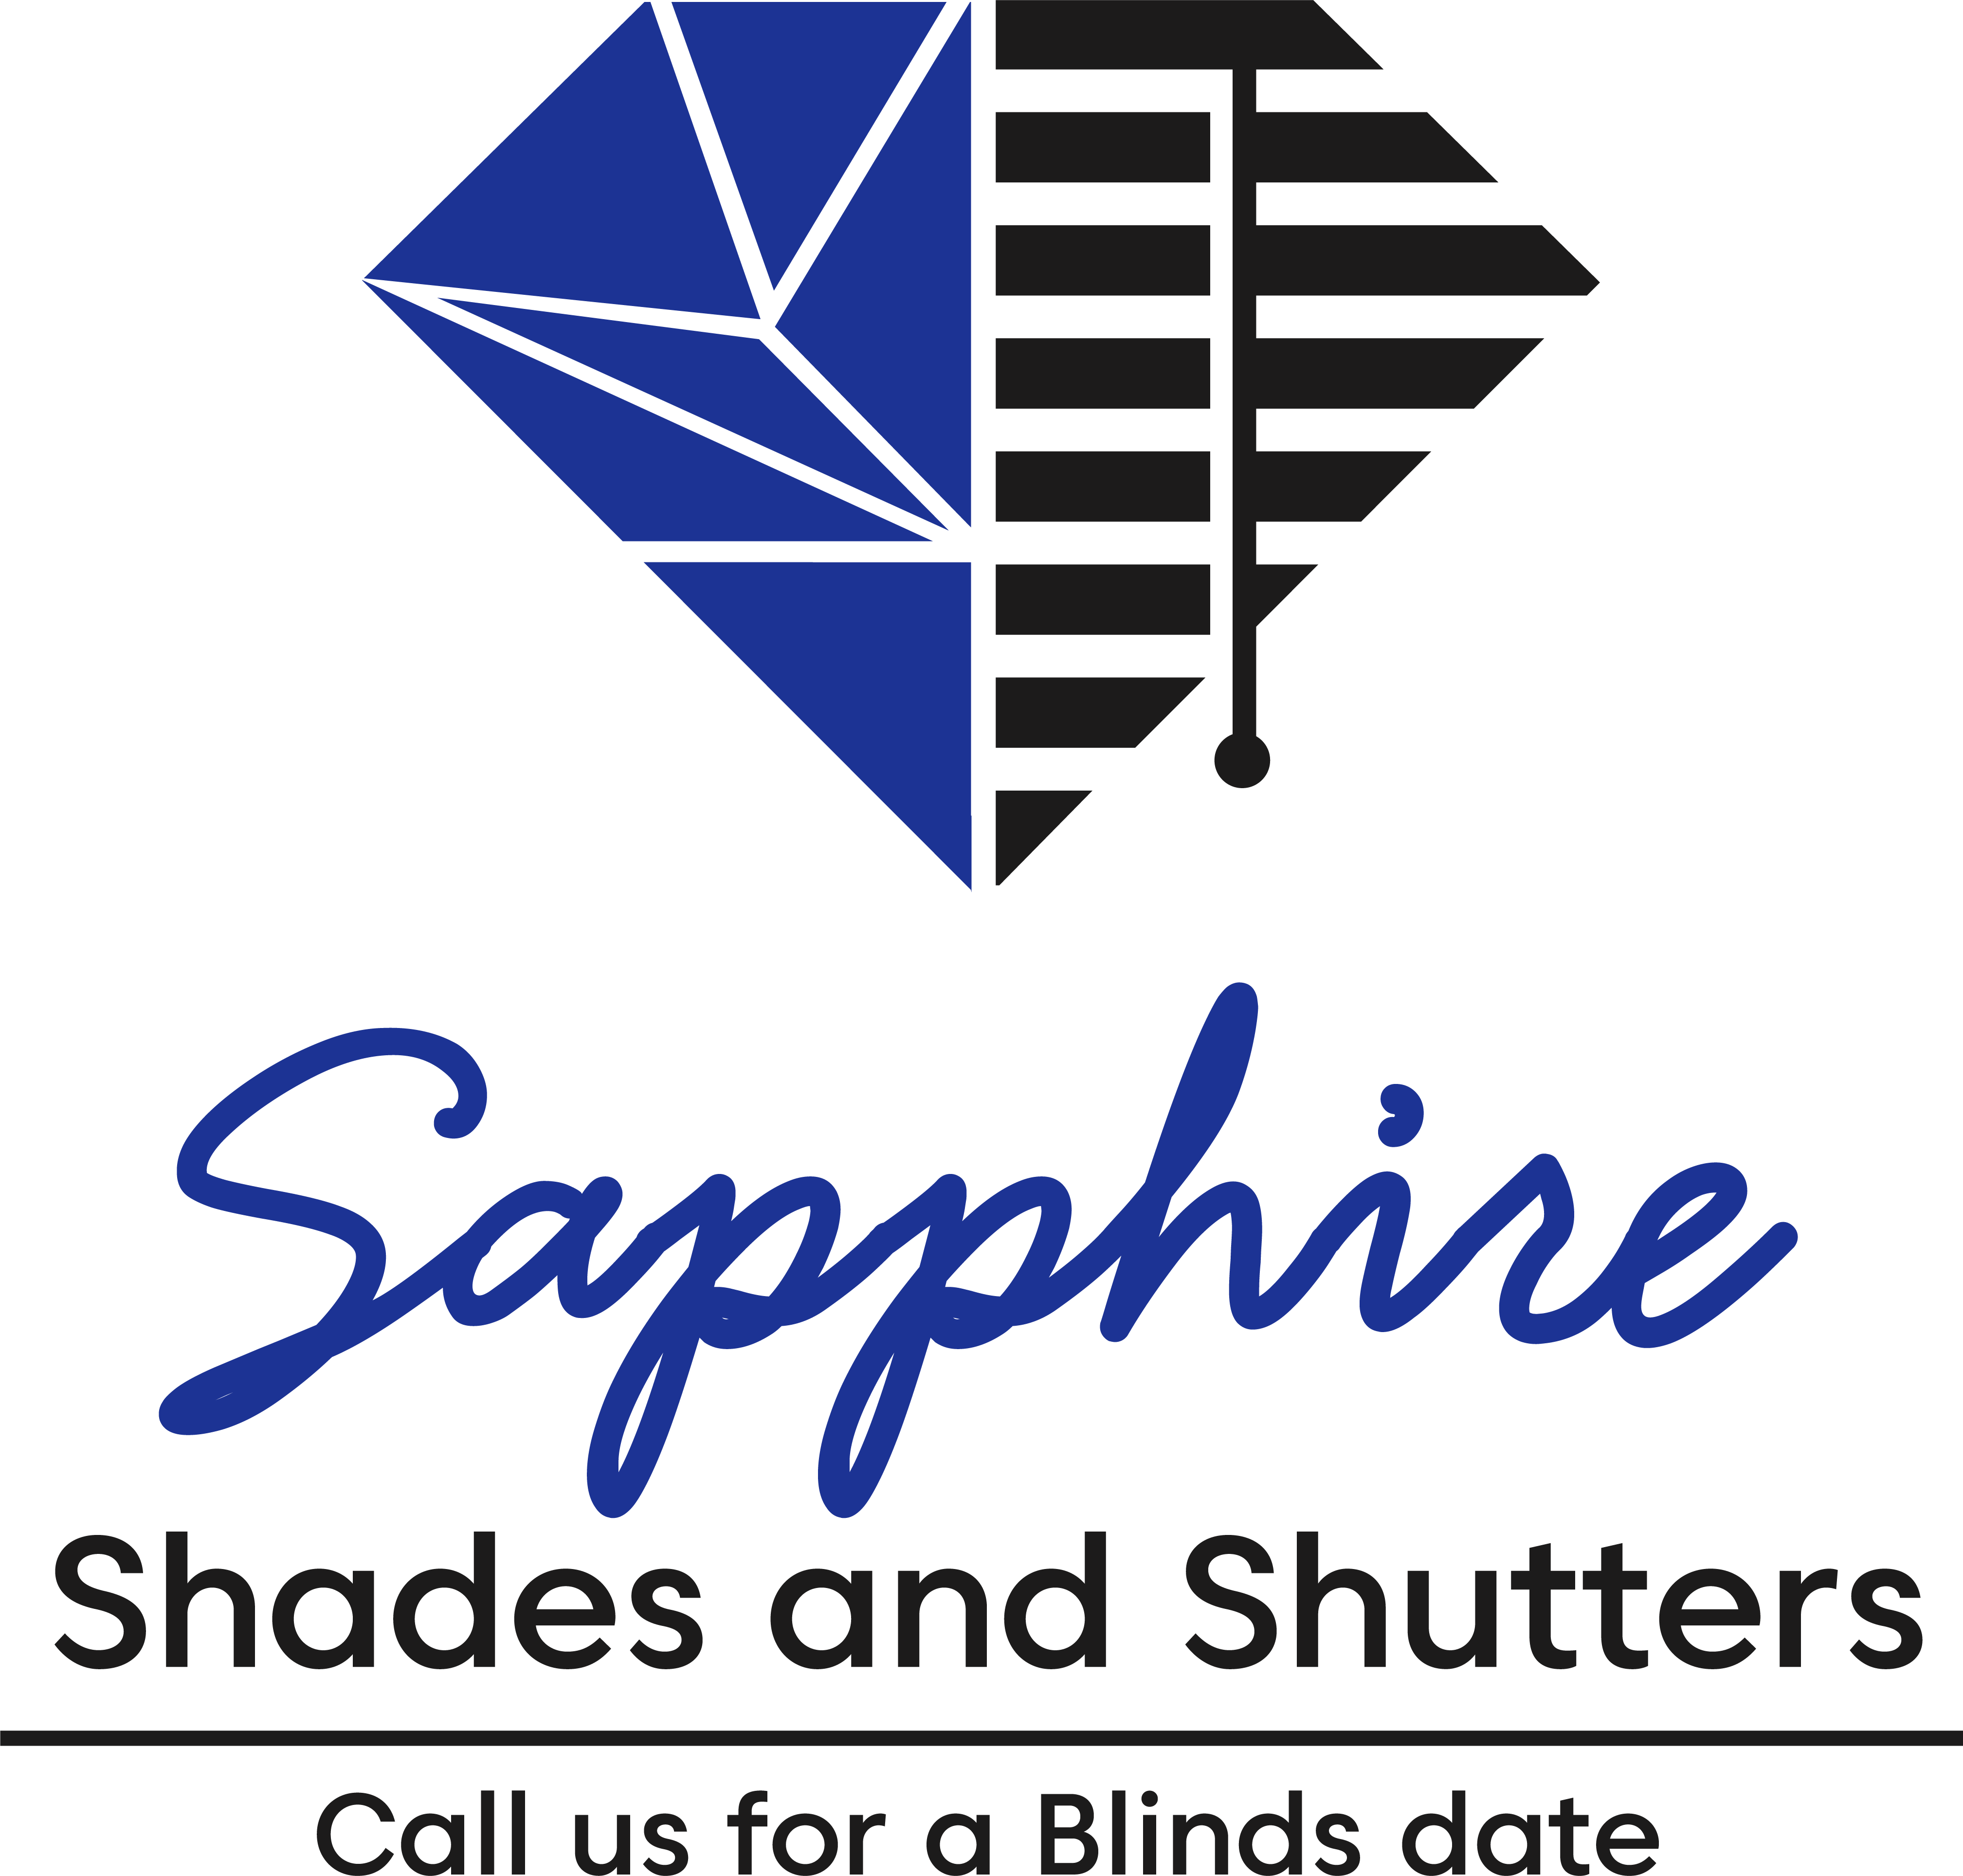 Sapphire Shades and Shutters Logo